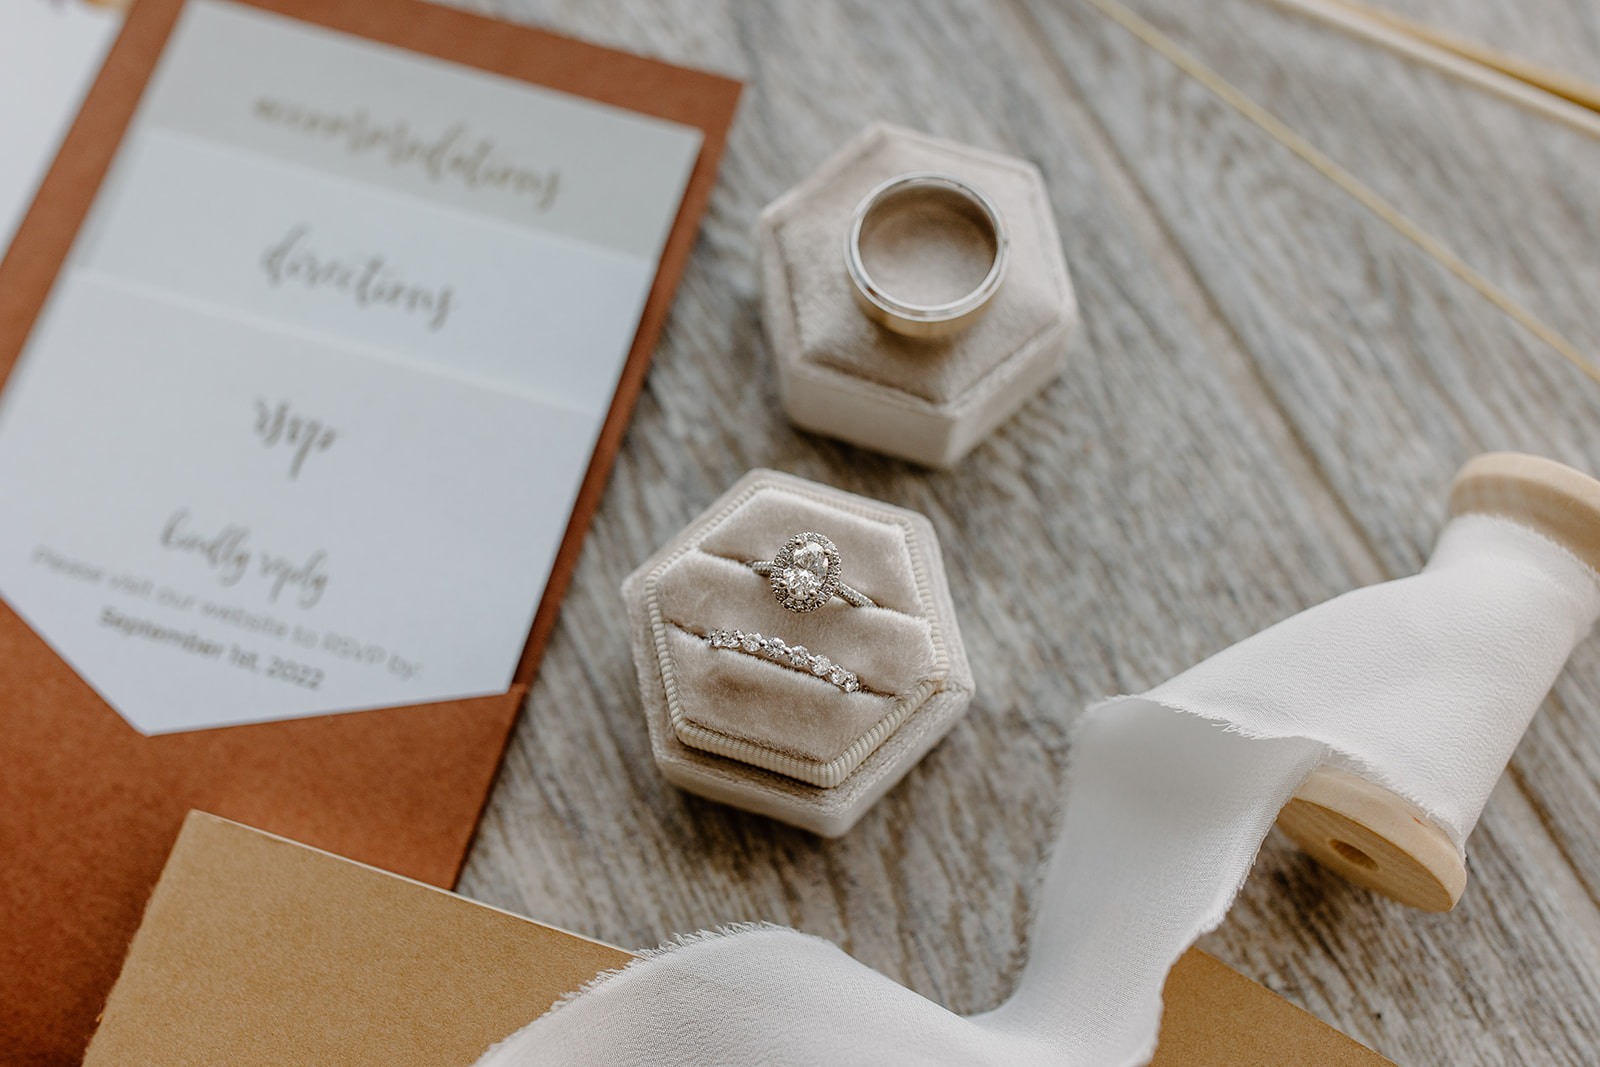 Flat lay of wedding invitations, rings, jewelry, and other details